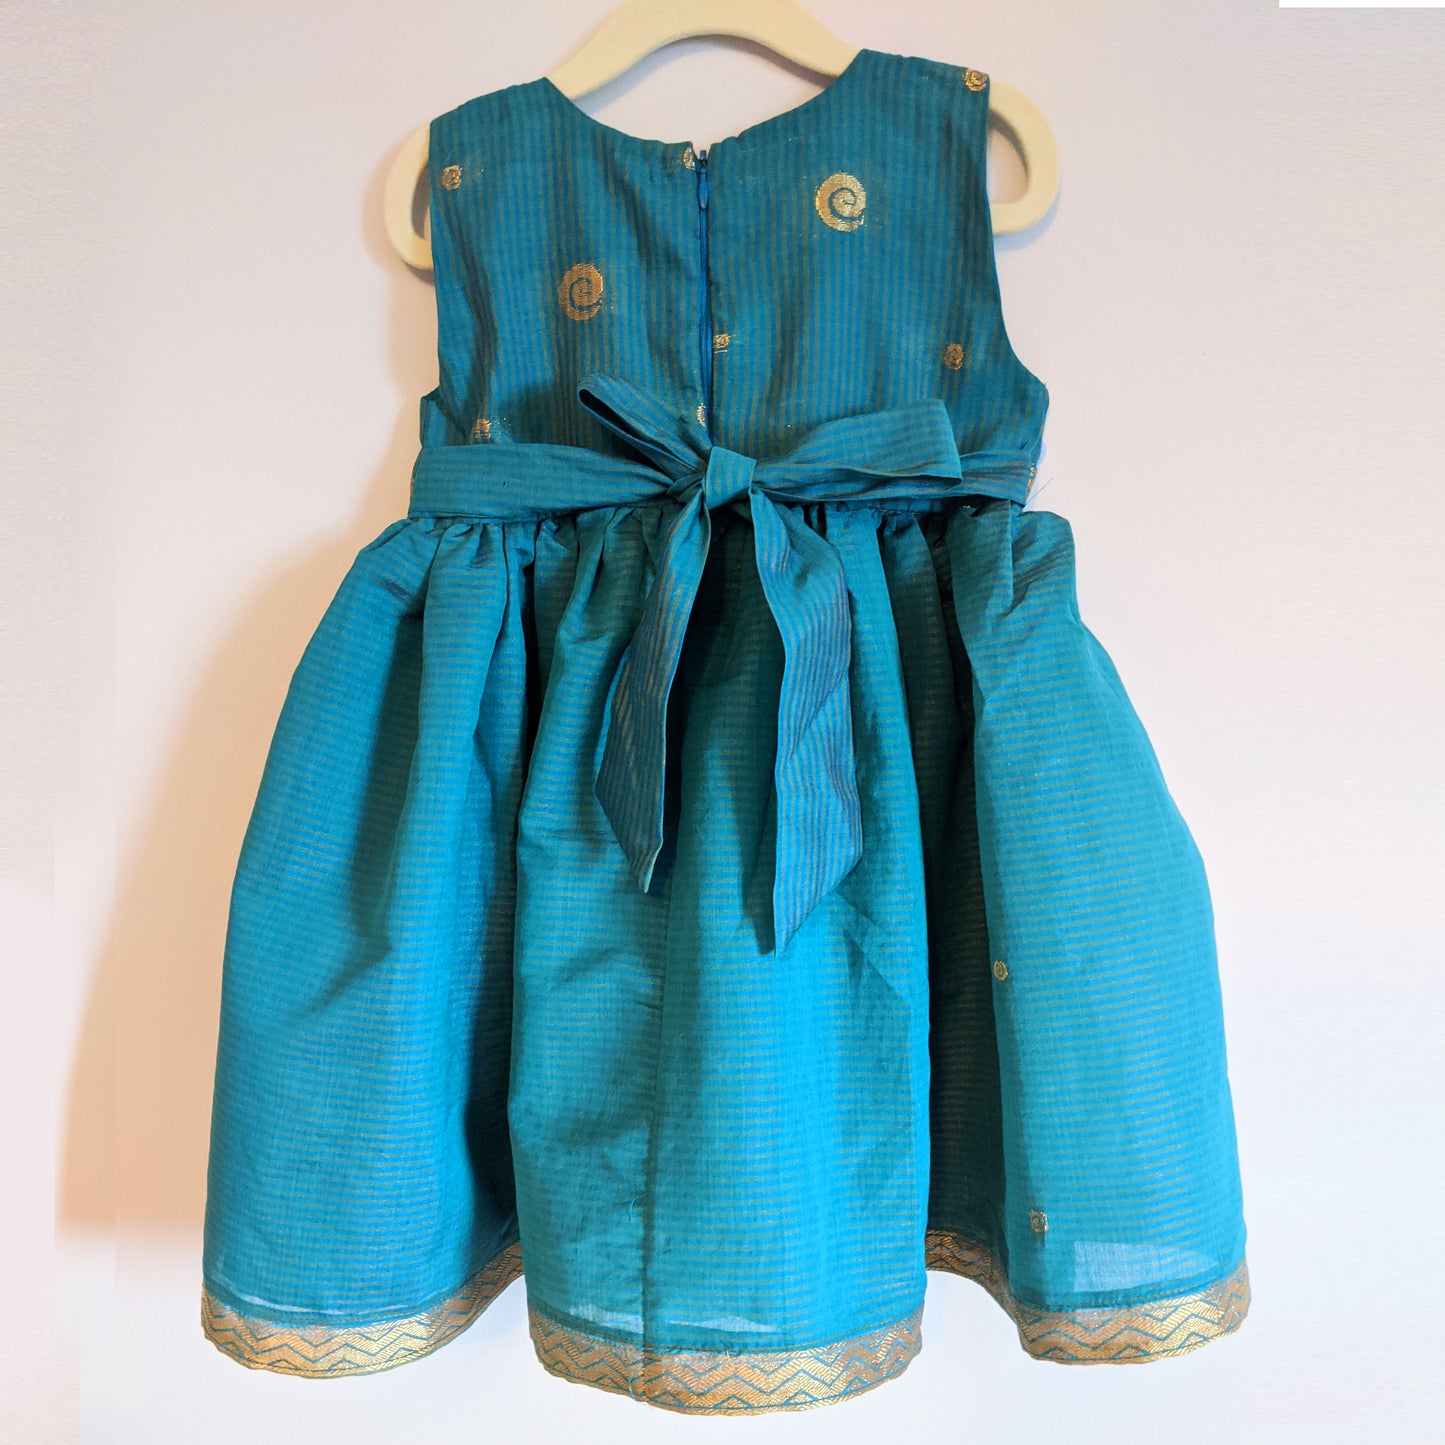 Teal Party Dress For Ages 5-6 Years